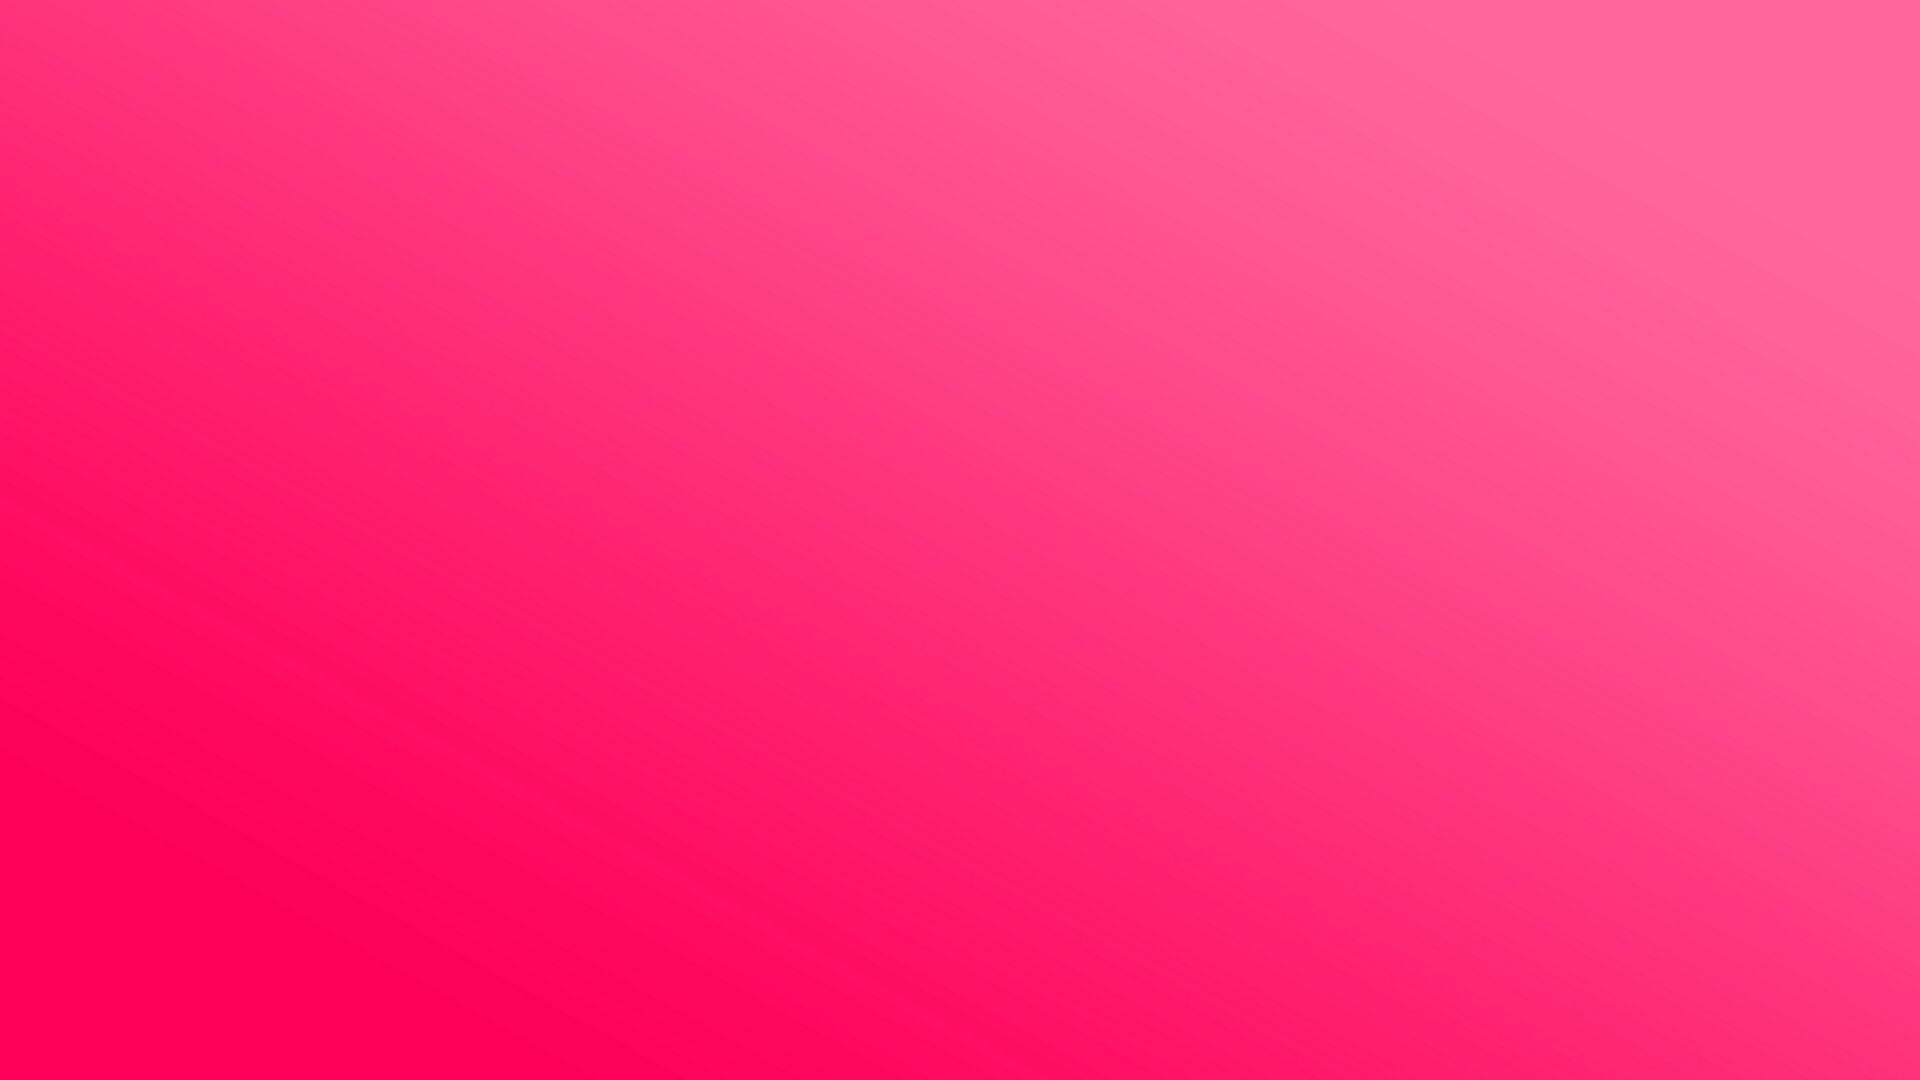 Download wallpaper 1920x1080 pink, solid, color, light, bright full